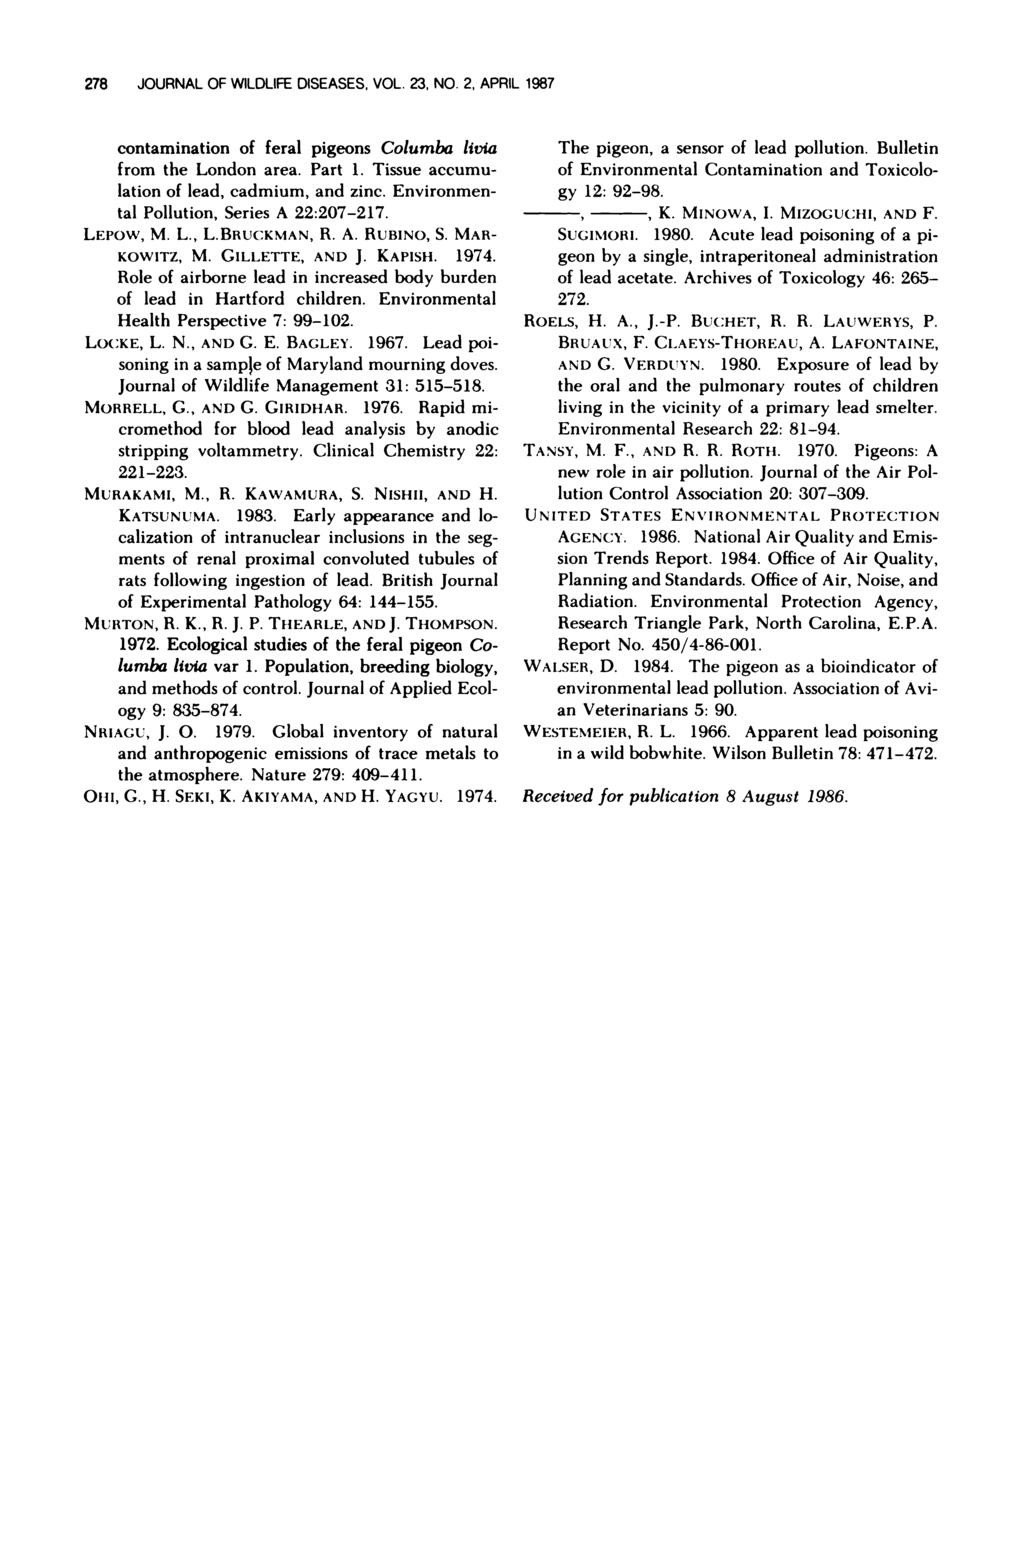 278 JOURNAL OF WILDLIFE DISEASES, VOL. 23, NO. 2, APRIL 1987 contamination of feral pigeons Columba livia from the London area. Part 1. Tissue accumulation of lead, cadmium, and zinc.